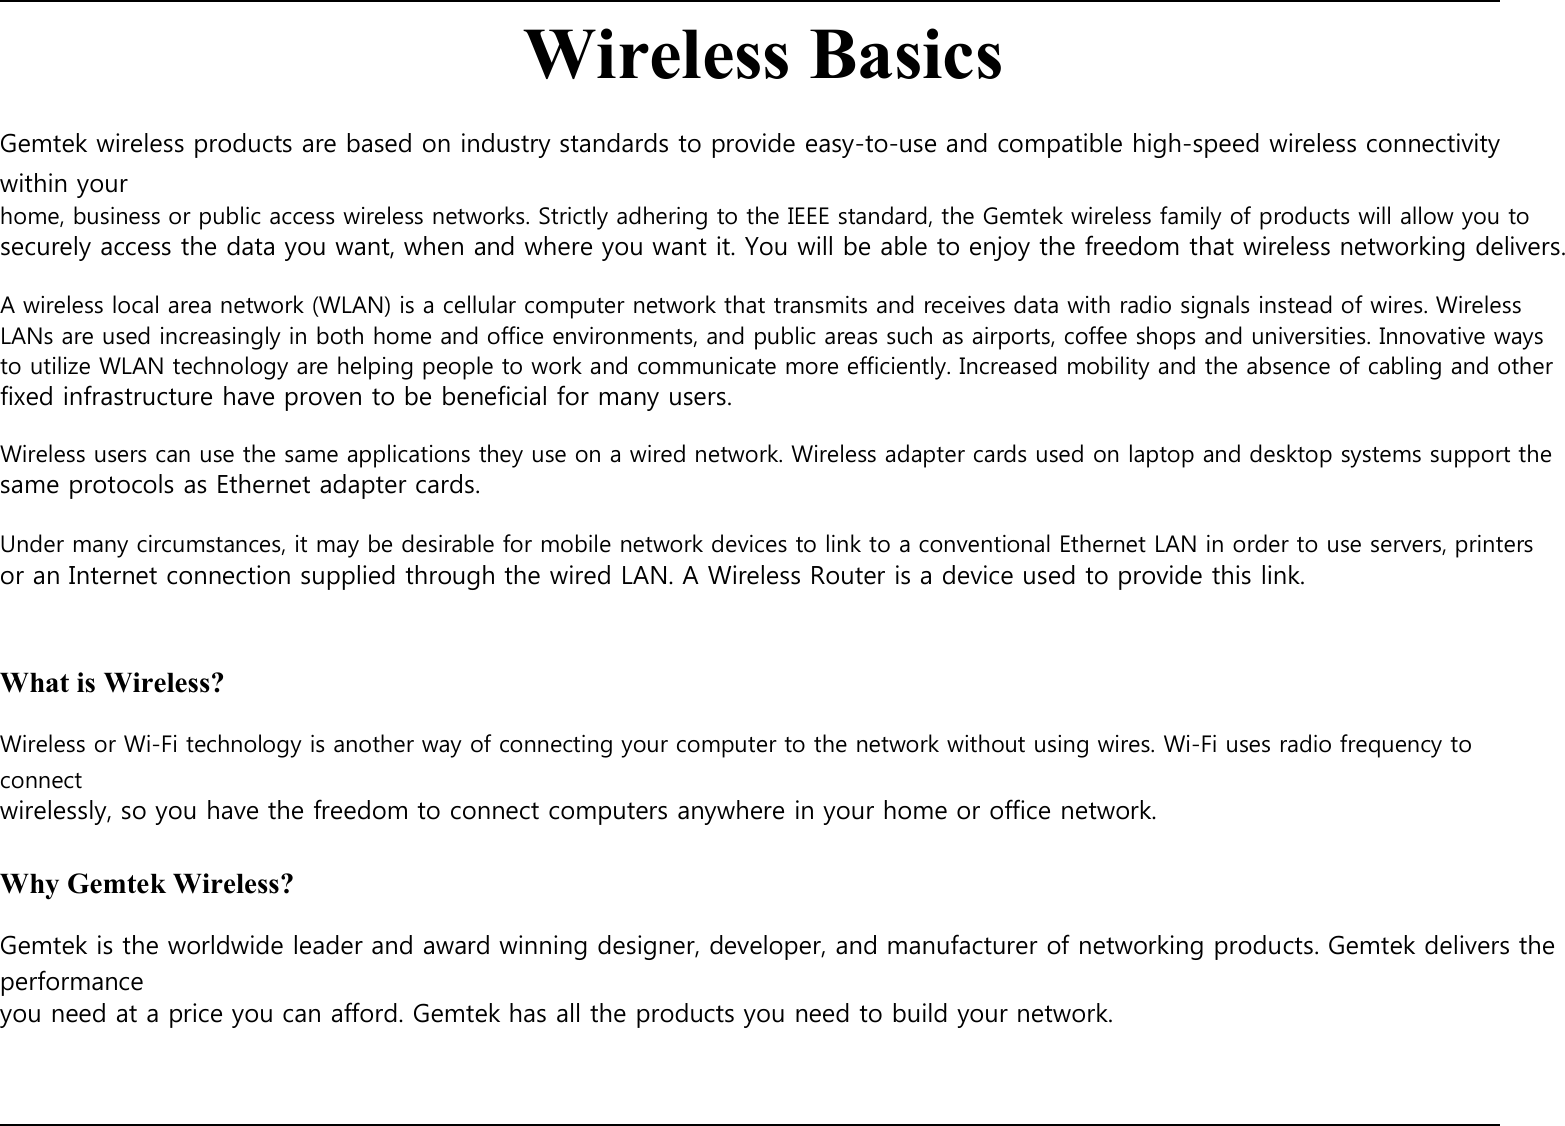    Wireless Basics  Gemtek wireless products are based on industry standards to provide easy-to-use and compatible high-speed wireless connectivity within your home, business or public access wireless networks. Strictly adhering to the IEEE standard, the Gemtek wireless family of products will allow you to securely access the data you want, when and where you want it. You will be able to enjoy the freedom that wireless networking delivers.  A wireless local area network (WLAN) is a cellular computer network that transmits and receives data with radio signals instead of wires. Wireless LANs are used increasingly in both home and office environments, and public areas such as airports, coffee shops and universities. Innovative ways to utilize WLAN technology are helping people to work and communicate more efficiently. Increased mobility and the absence of cabling and other fixed infrastructure have proven to be beneficial for many users.  Wireless users can use the same applications they use on a wired network. Wireless adapter cards used on laptop and desktop systems support the same protocols as Ethernet adapter cards.  Under many circumstances, it may be desirable for mobile network devices to link to a conventional Ethernet LAN in order to use servers, printers or an Internet connection supplied through the wired LAN. A Wireless Router is a device used to provide this link.    What is Wireless?  Wireless or Wi-Fi technology is another way of connecting your computer to the network without using wires. Wi-Fi uses radio frequency to connect wirelessly, so you have the freedom to connect computers anywhere in your home or office network.  Why Gemtek Wireless?  Gemtek is the worldwide leader and award winning designer, developer, and manufacturer of networking products. Gemtek delivers the performance you need at a price you can afford. Gemtek has all the products you need to build your network.           